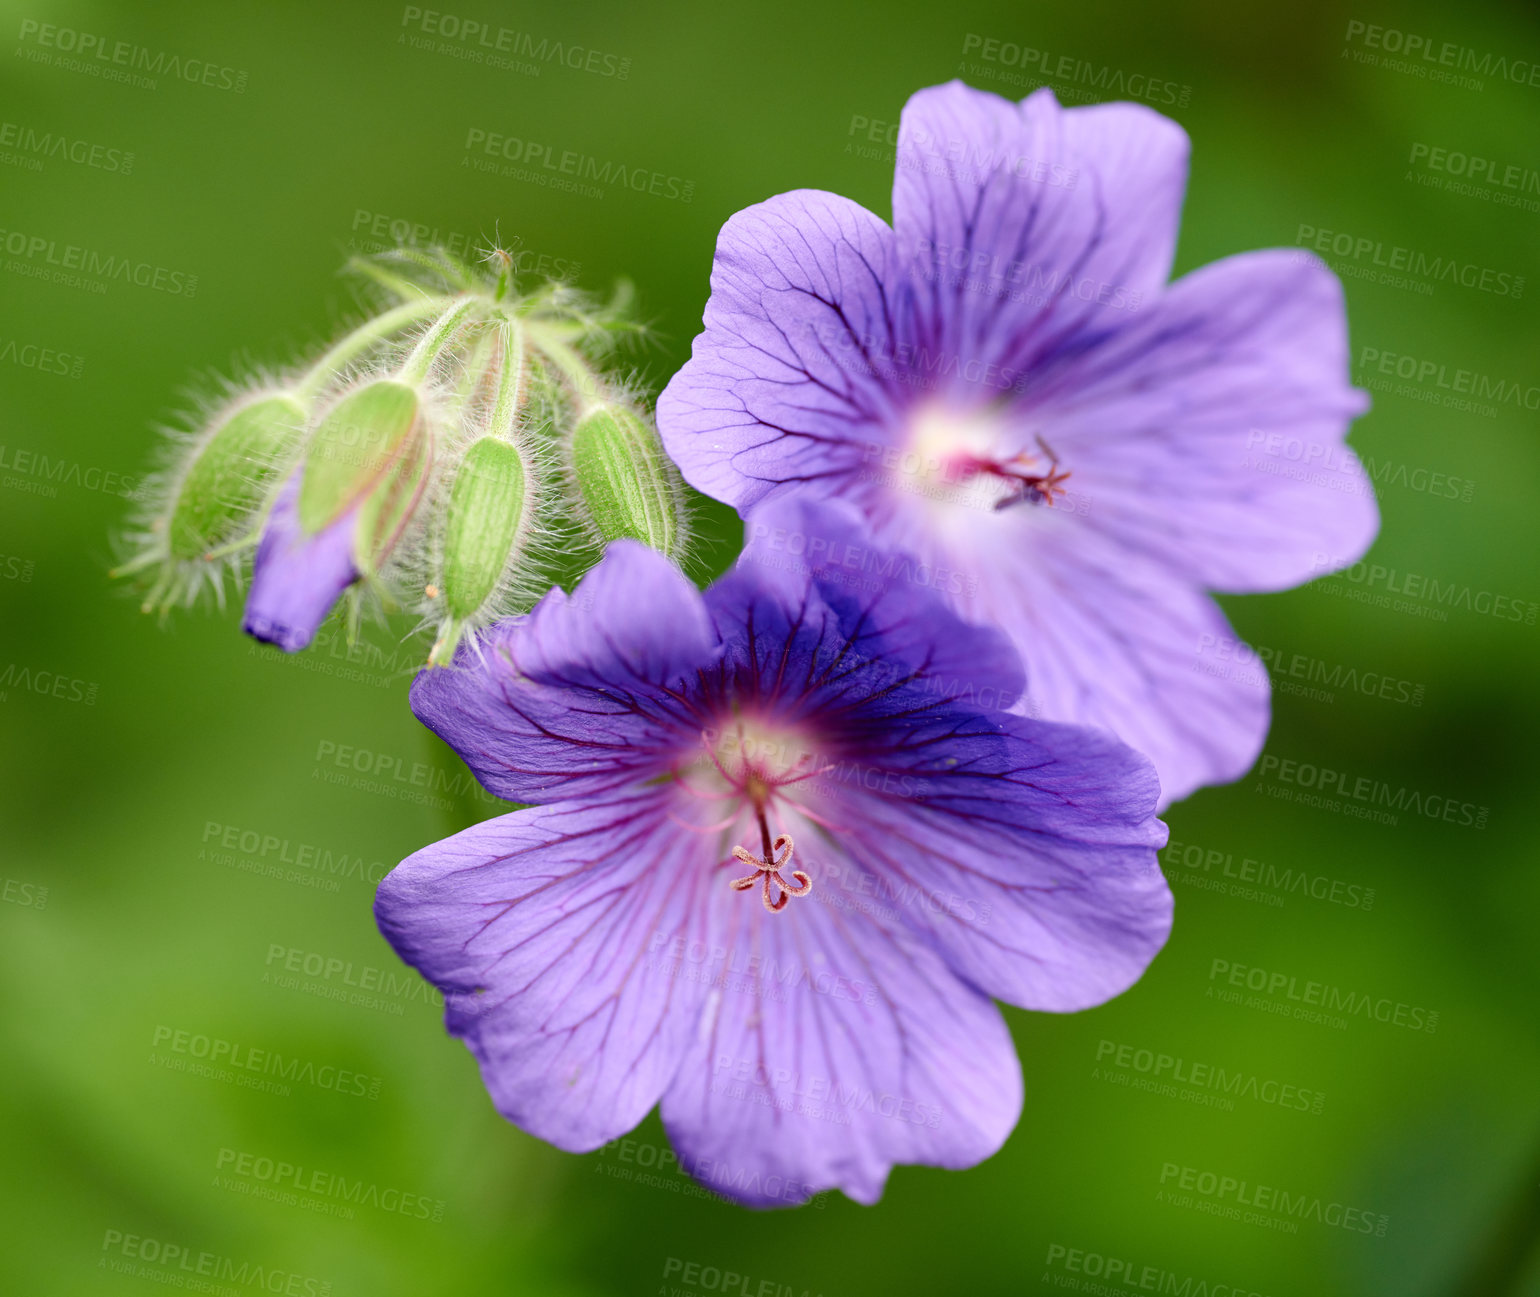 Buy stock photo Closeup of purple or blue geranium flowers growing in a botanical garden on a sunny day outdoors. Beautiful plants with vibrant violet petals blooming and blossoming in spring in a lush environment